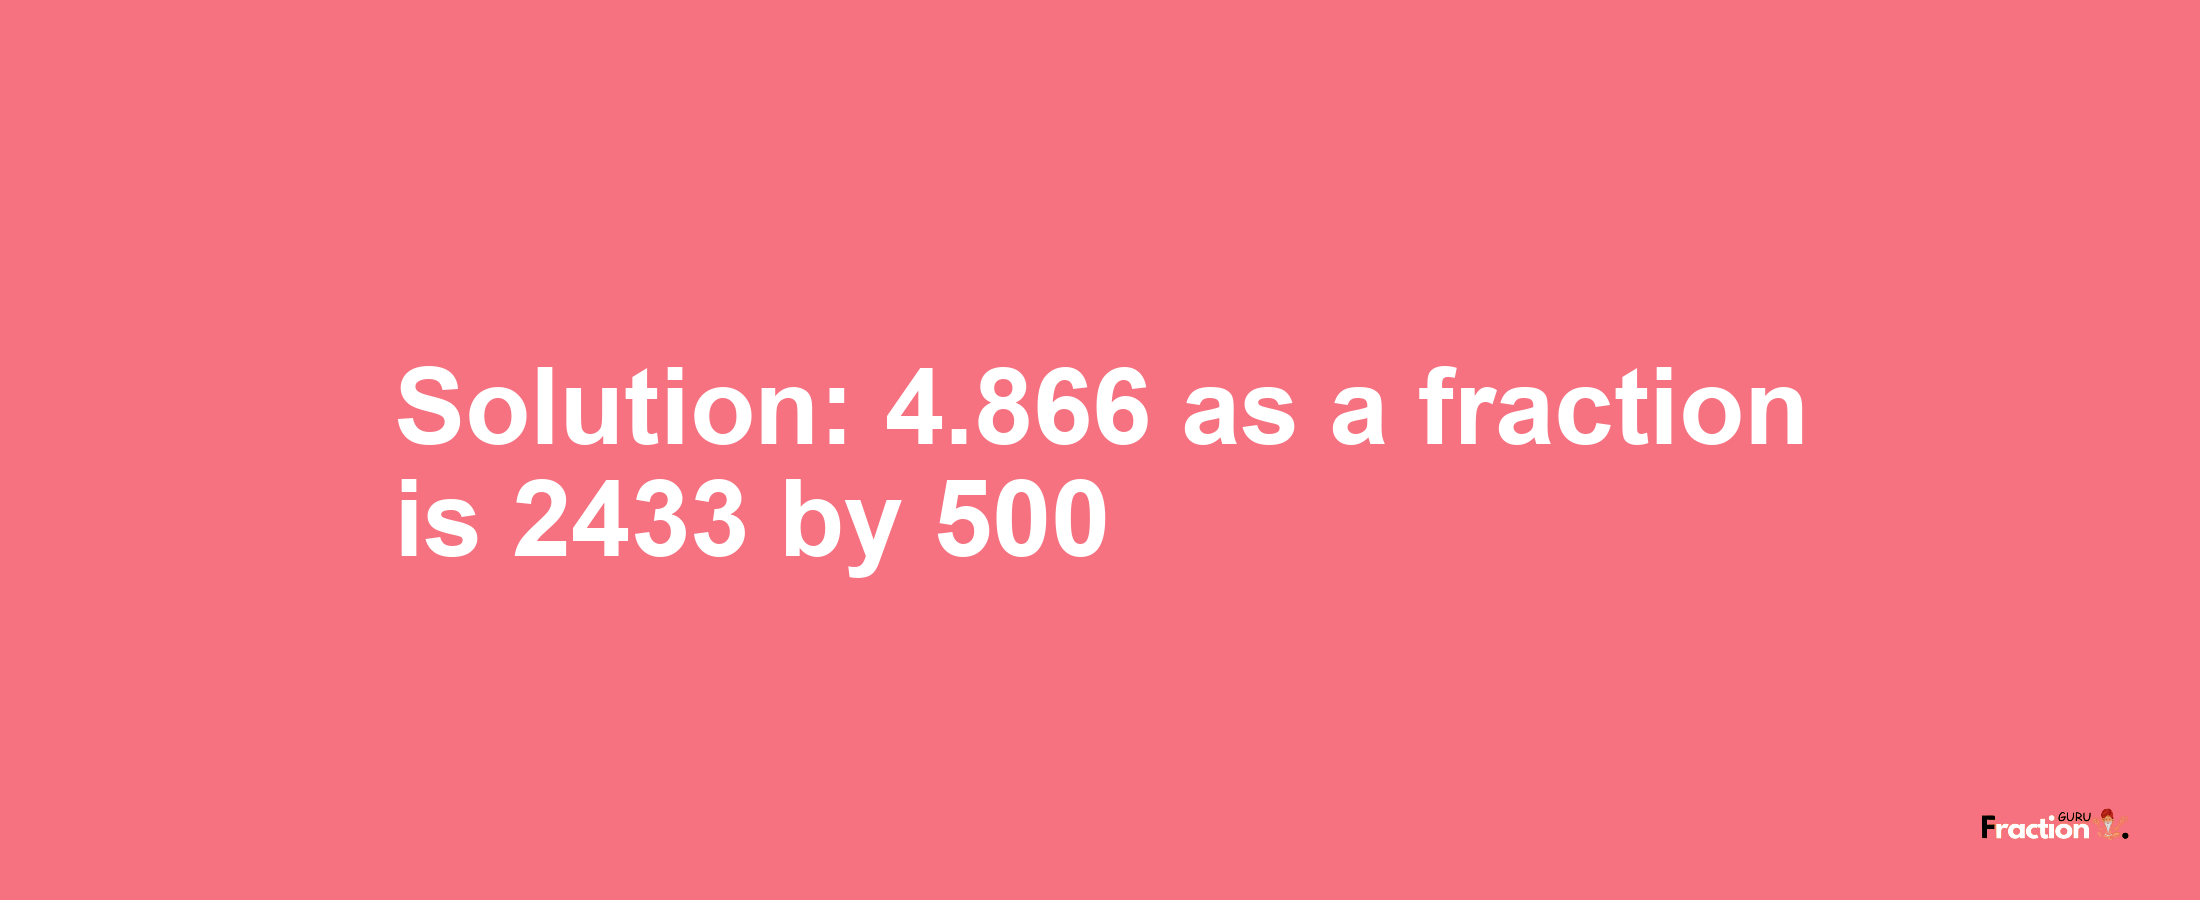 Solution:4.866 as a fraction is 2433/500